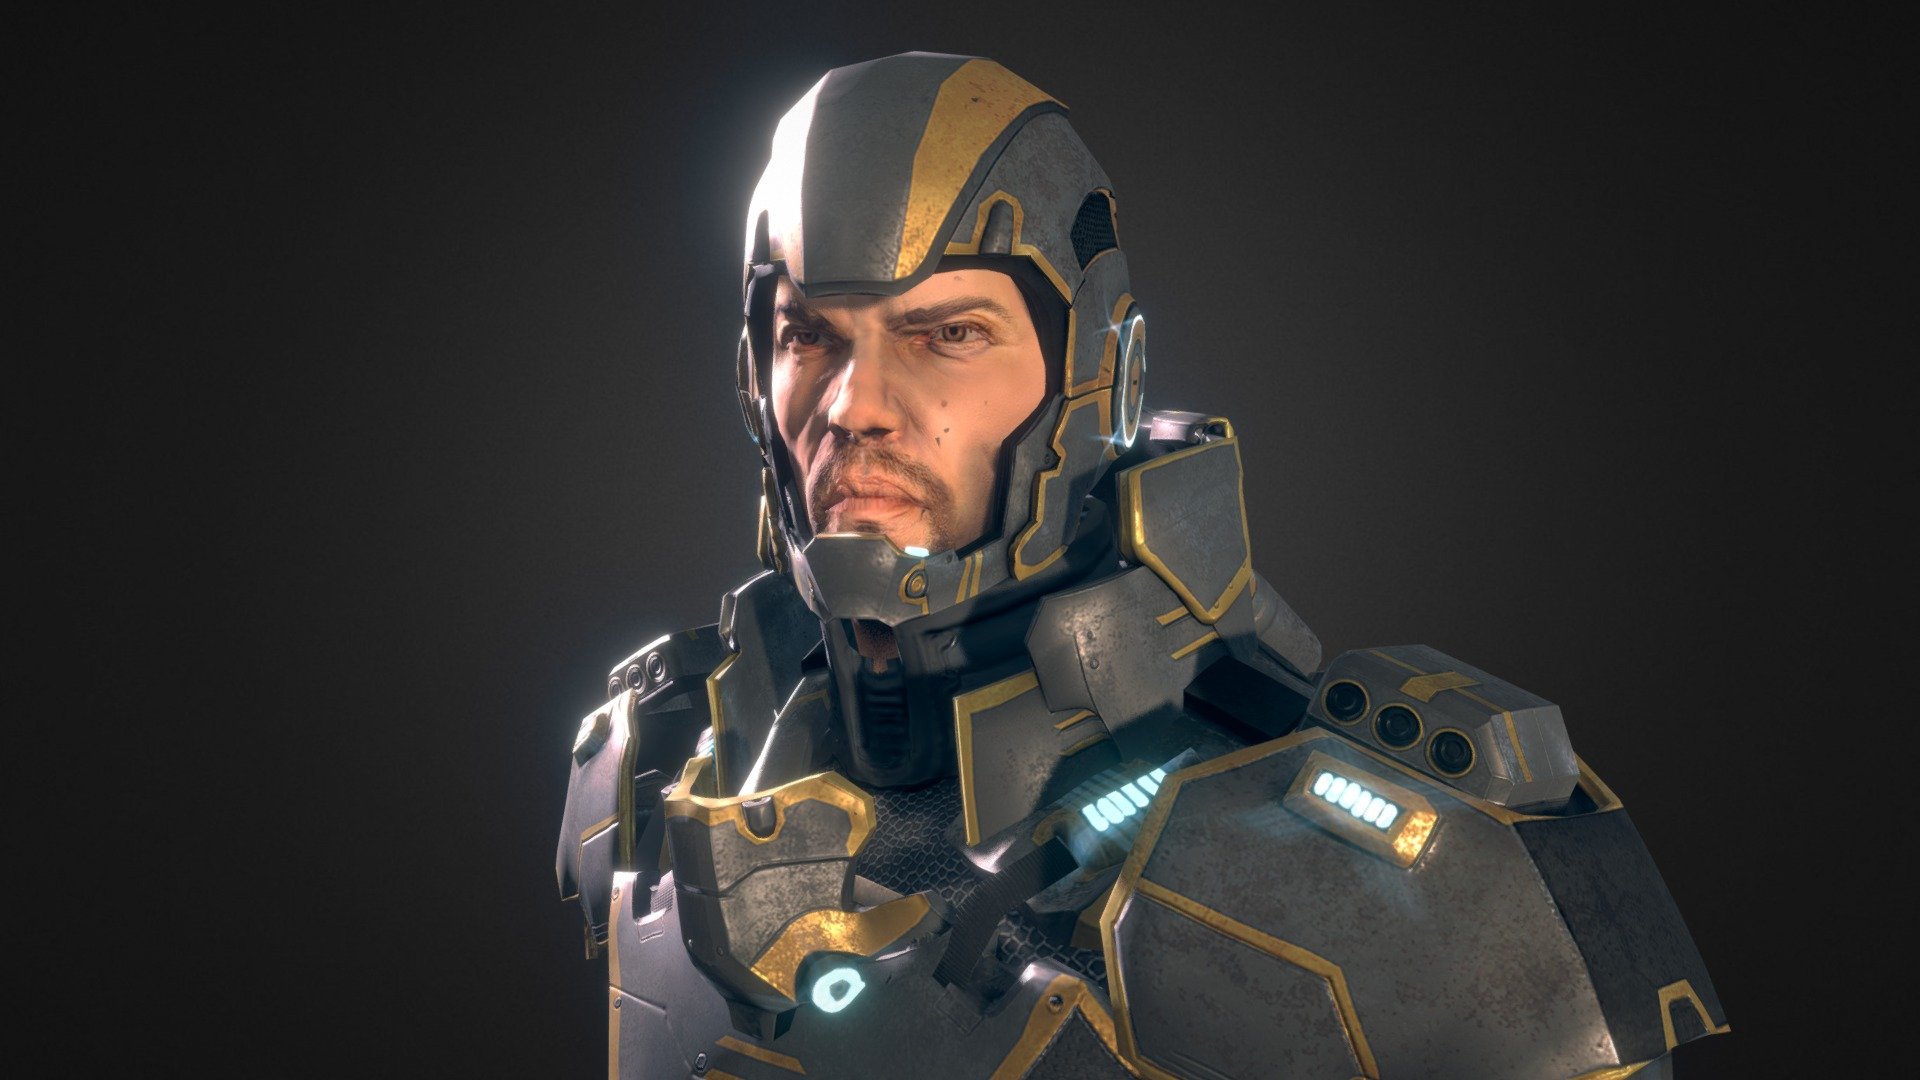 .The Sci-Fi hero is a character model suited for your mid-high quality projects

-Content-

The Sci-Fi Hero has the body divided into head, body, hair, upper part of the armor, helmet, mask and lower part of the armor

Includes a blender scene with the Sci-Fi Hero rigged with a very simple rig suited for unity's mecanim, the scene has all the materials applied and a very basic lighting-camera setup to render in cycles.

There are three LODs in .FBX format

-LOD 0- Body(5022 traingles), hair(1060 triangles), head(3058 triangles), Helmet(1690 triangles), Mask(448 triangles), LowArmor(3264 triangles), UpperArmor(9592 triangles)

-LOD 1- Body(2967 triangles), hair(756 triangles), head(1336 triangles), Helmet(636 triangles), Mask(338 triangles), LowArmor(1410 triangles), UpperArmor(4624 triangles)

-LOD 2- Body(2505 triangles), hair(438 triangles), head(683 triangles), Helmet(454 triangles), Mask(260 triangles), LowArmor(1040 triangles), UpperArmor(3400 triangles)

The Textures vary from 512x512 to 2048x2048 - Sci-Fi Hero - Buy Royalty Free 3D model by willmorillas 3d model